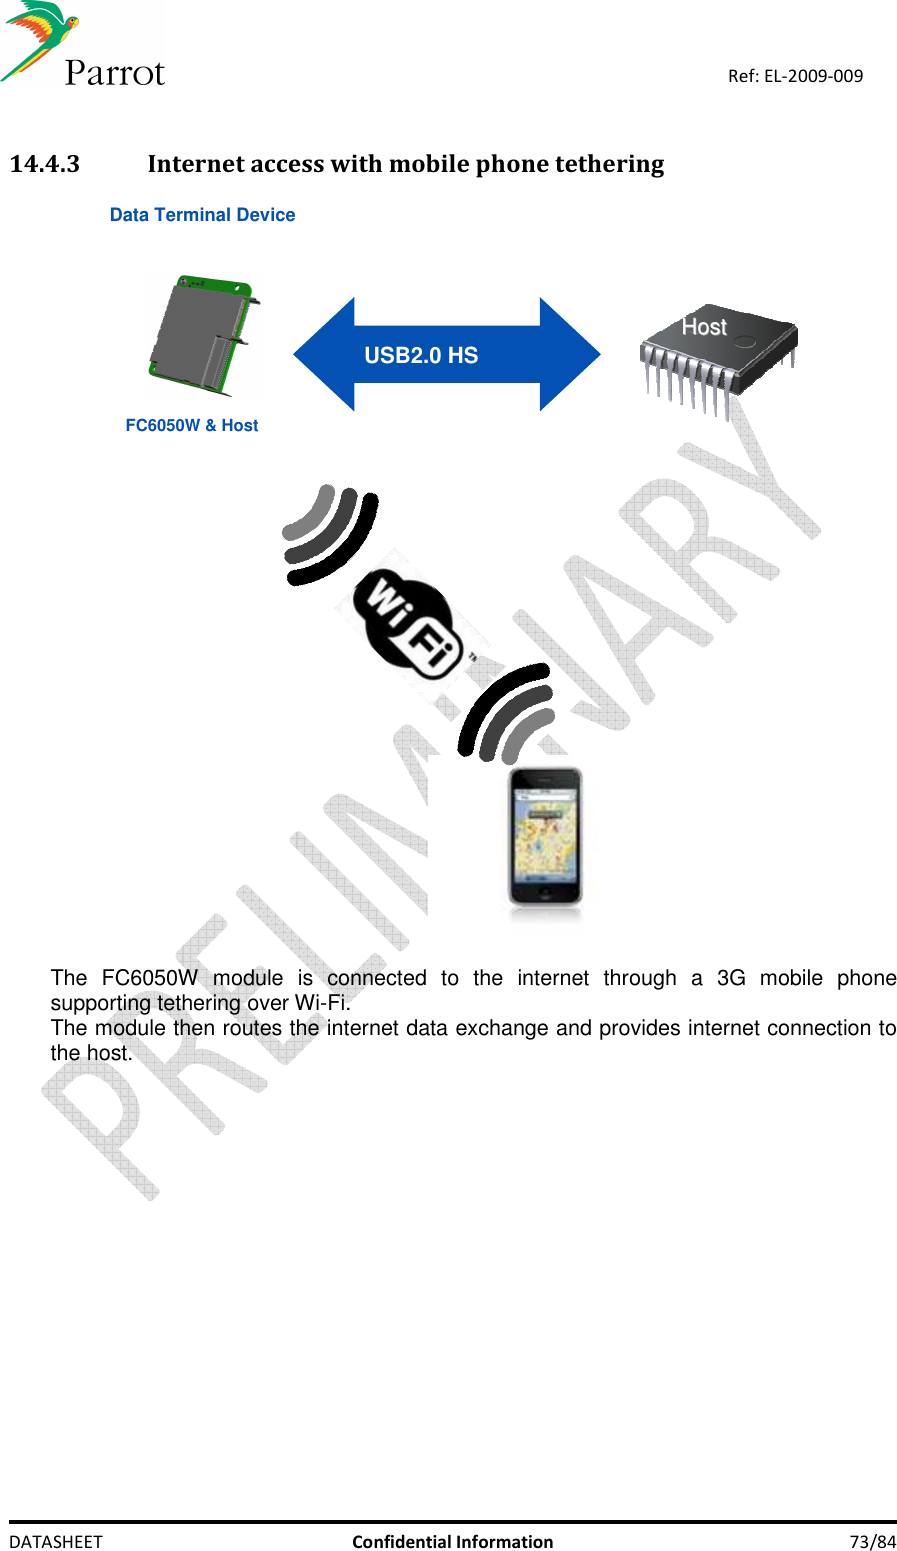    DATASHEET  Confidential Information  73/84 Ref: EL-2009-009  14.4.3 Internet access with mobile phone tethering   Data Terminal DeviceFC6050W &amp; Host  USB2.0 HS  HHoosstt   The  FC6050W  module  is  connected  to  the  internet  through  a  3G  mobile  phone supporting tethering over Wi-Fi.  The module then routes the internet data exchange and provides internet connection to the host. 